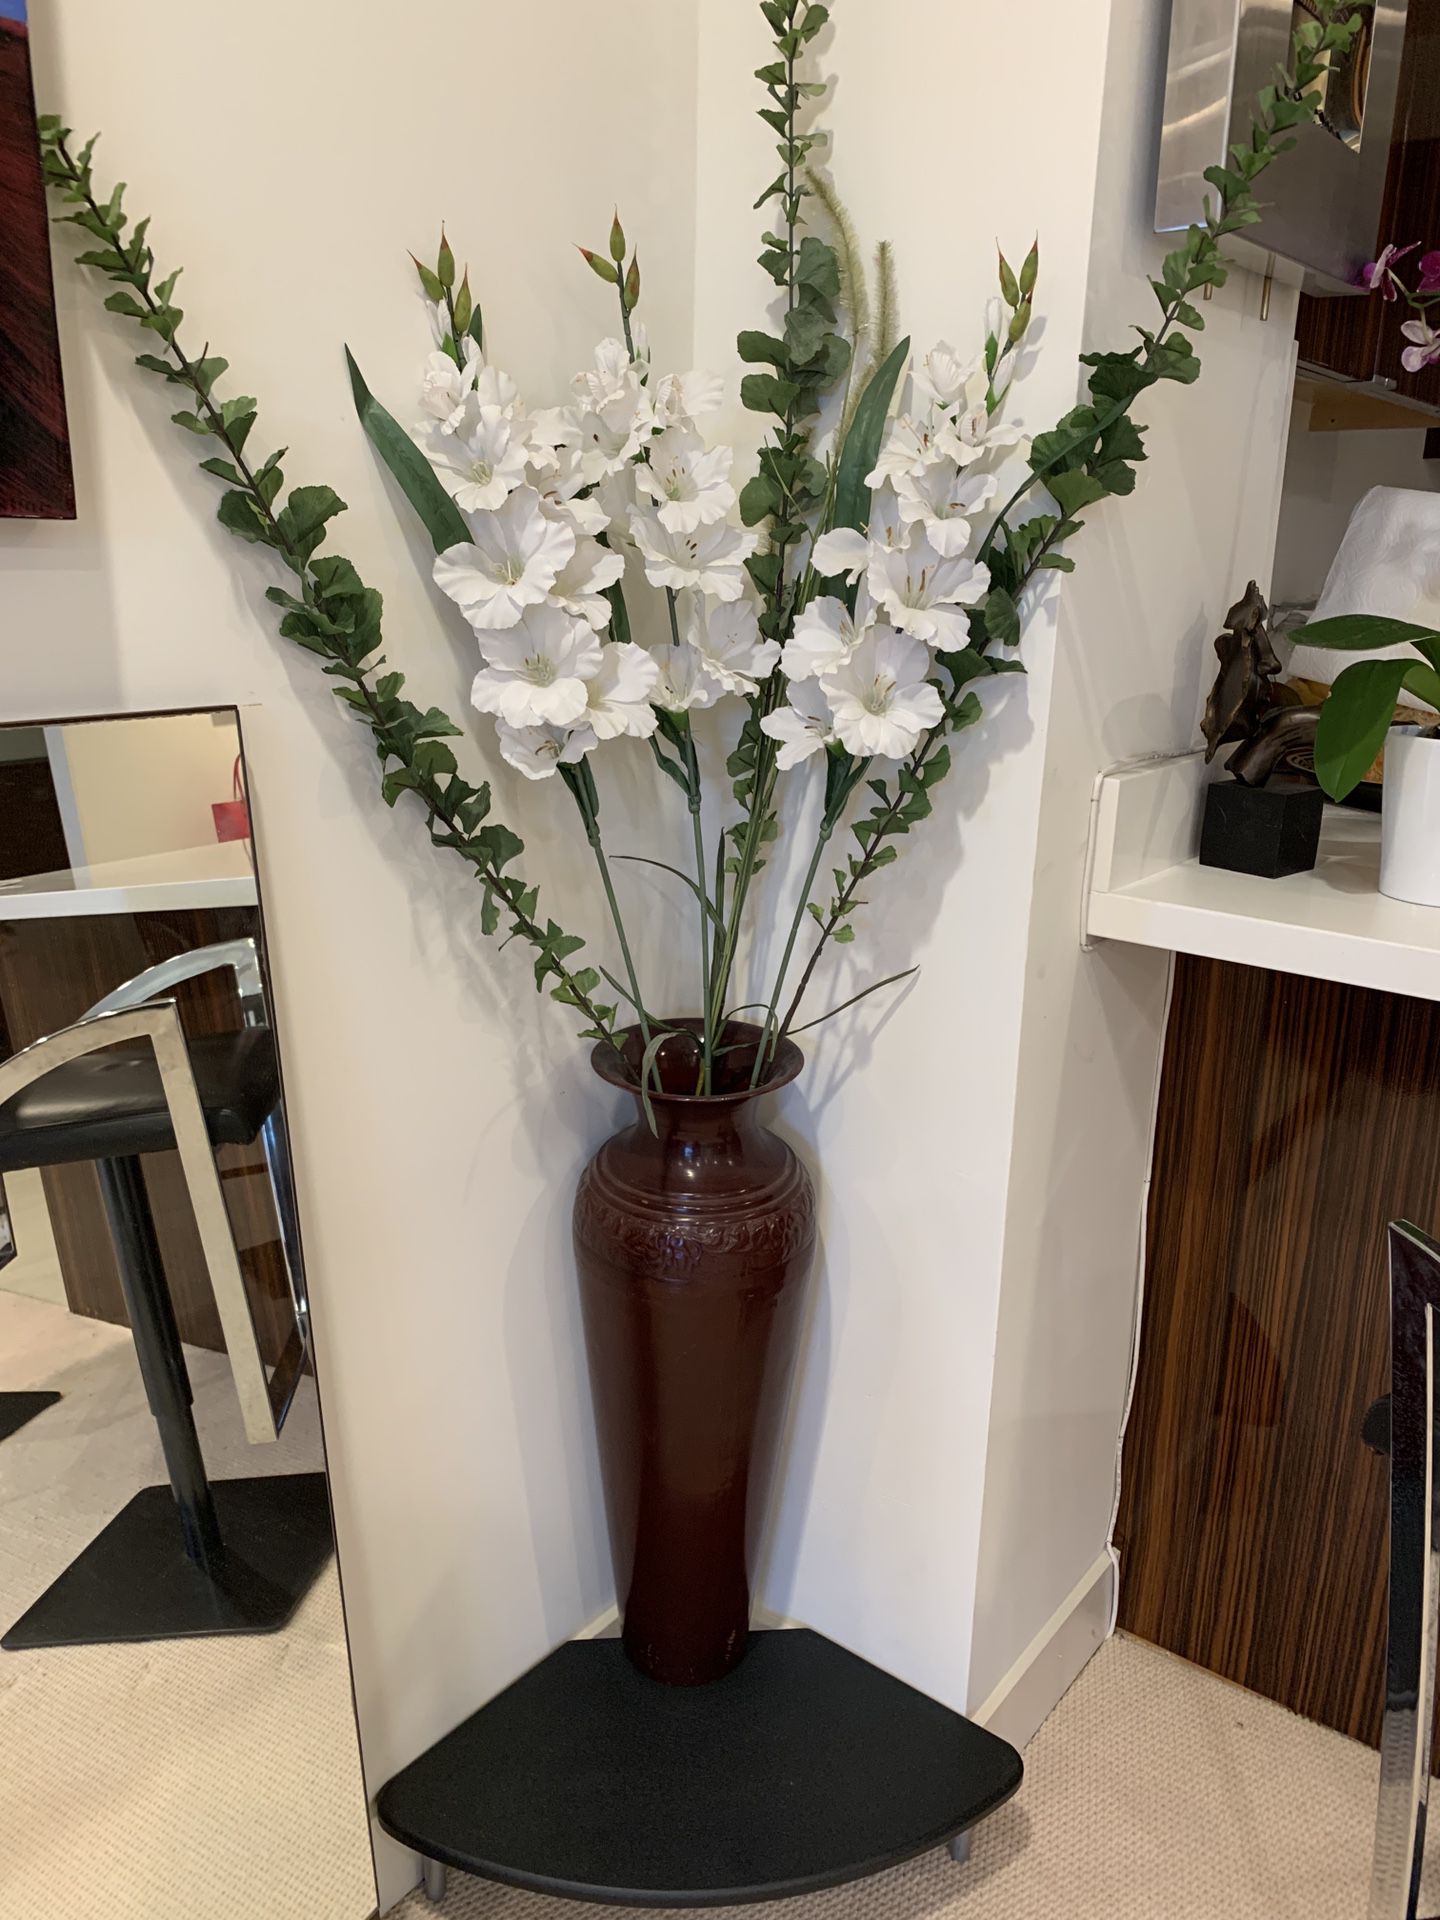 Beautiful vase with flowers